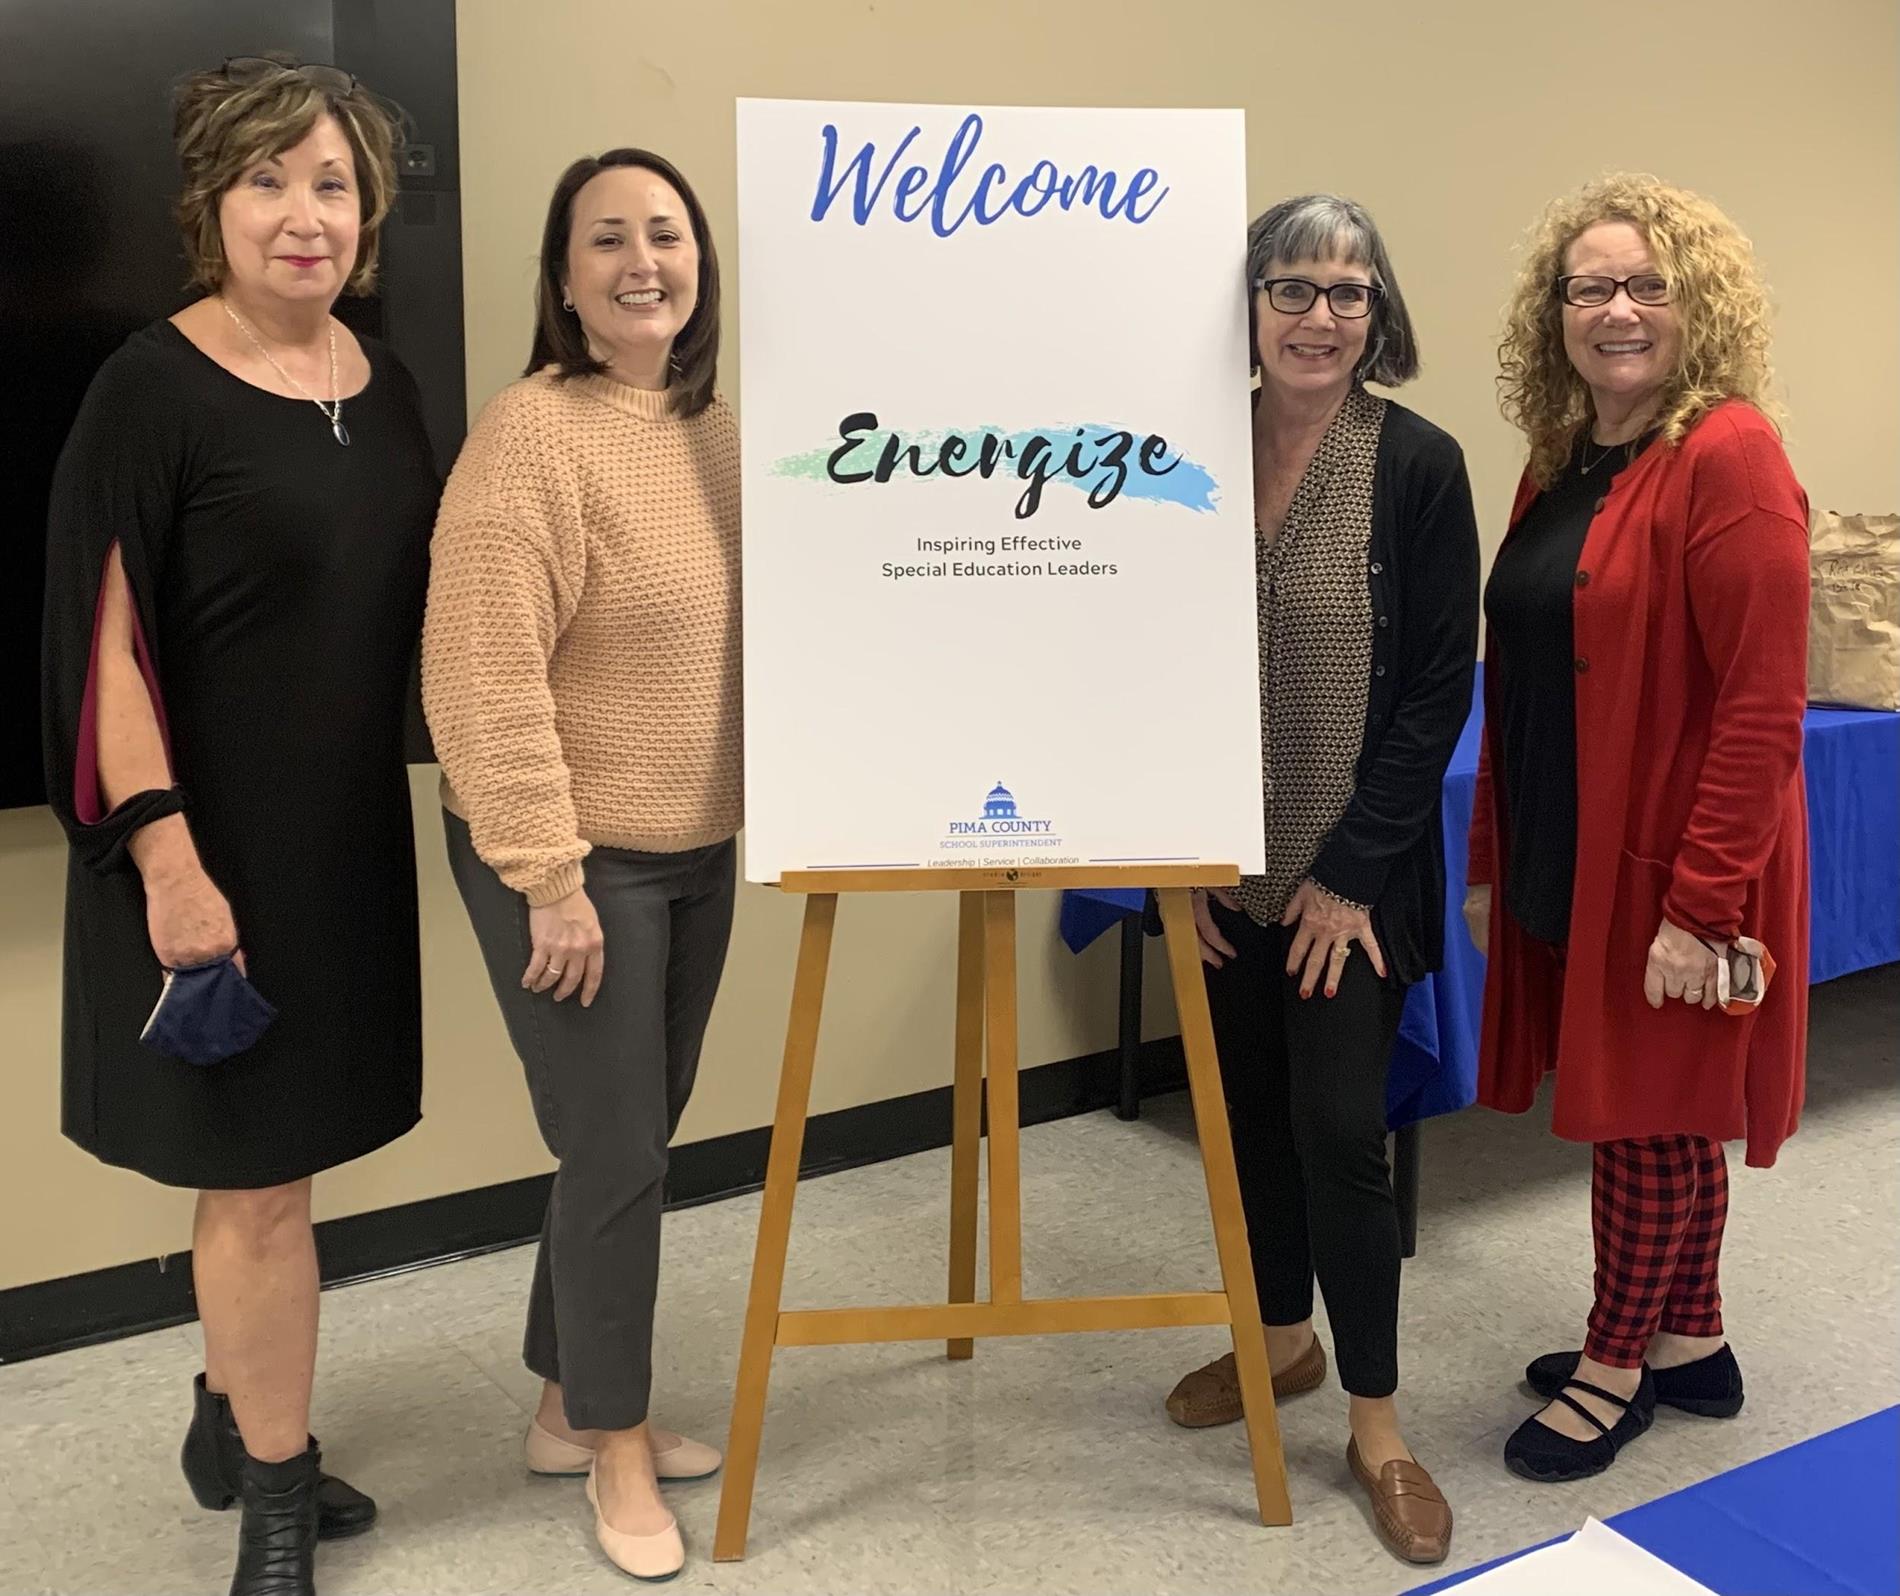 Members of the Pima County Superintendent’s Office Energize project    - Pictured (L-R) Diane Kent, Tiffany Hodge, Kathleen McNaboe, Maura Clark-Engle